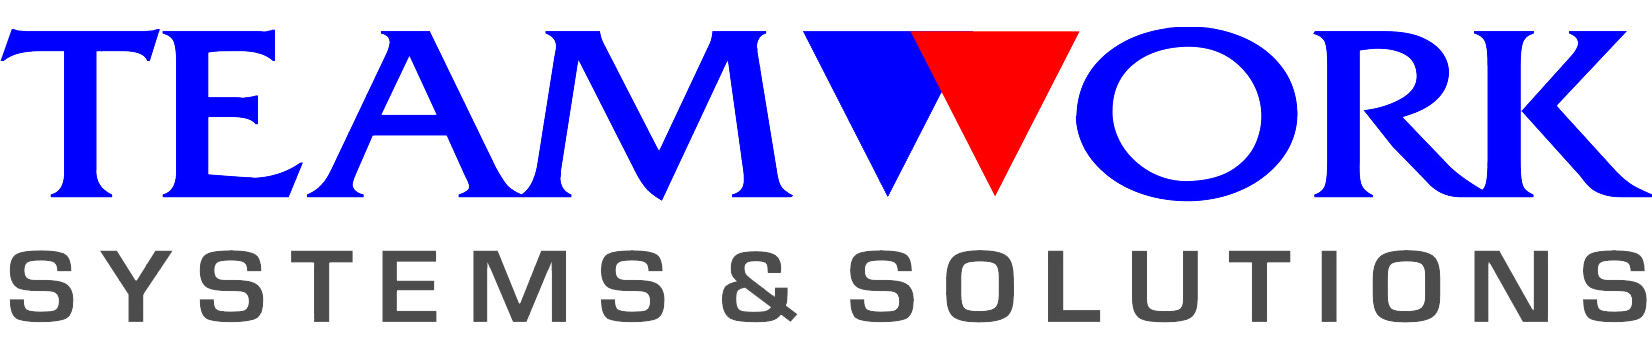 Teamwork Systems Solutions